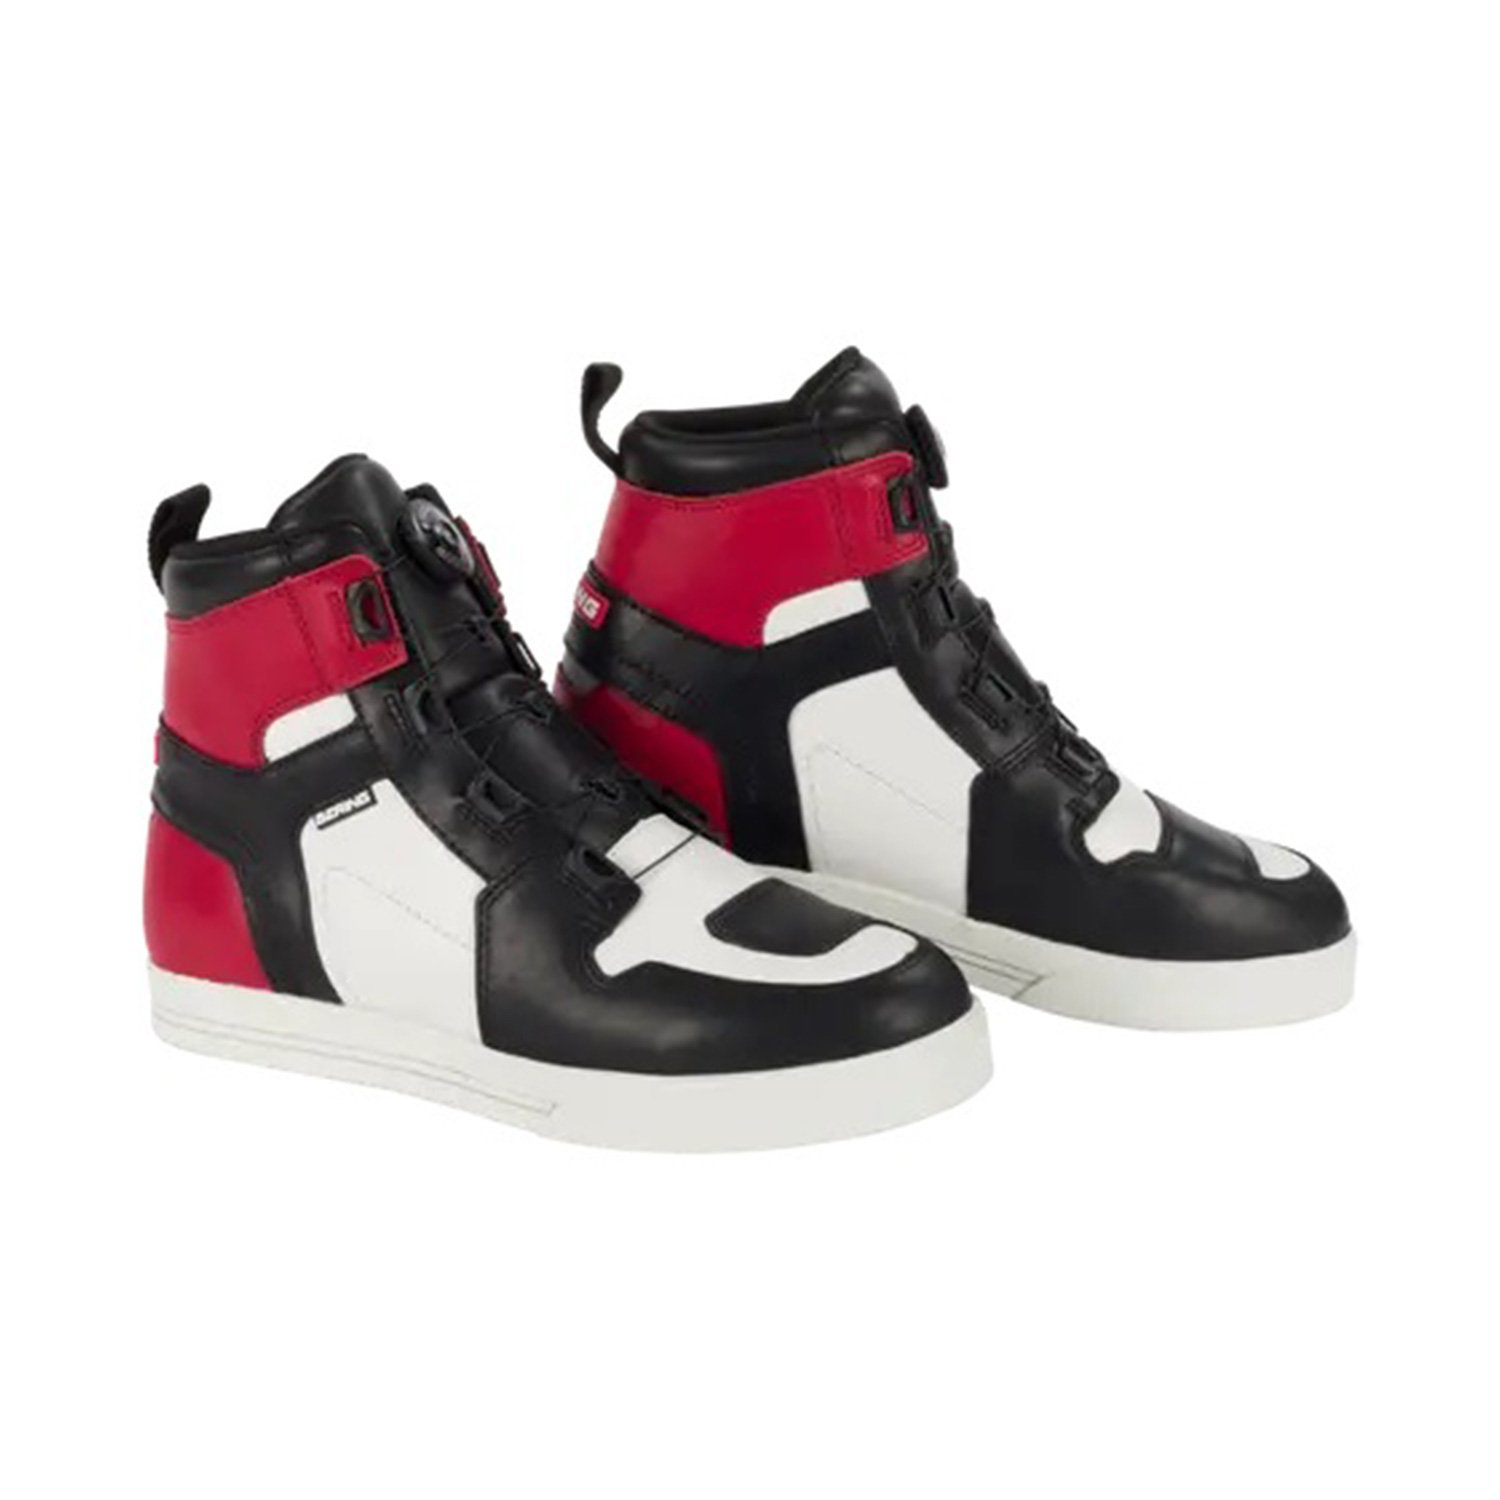 Bering Sneakers Reflex A-Top Black White Red 40